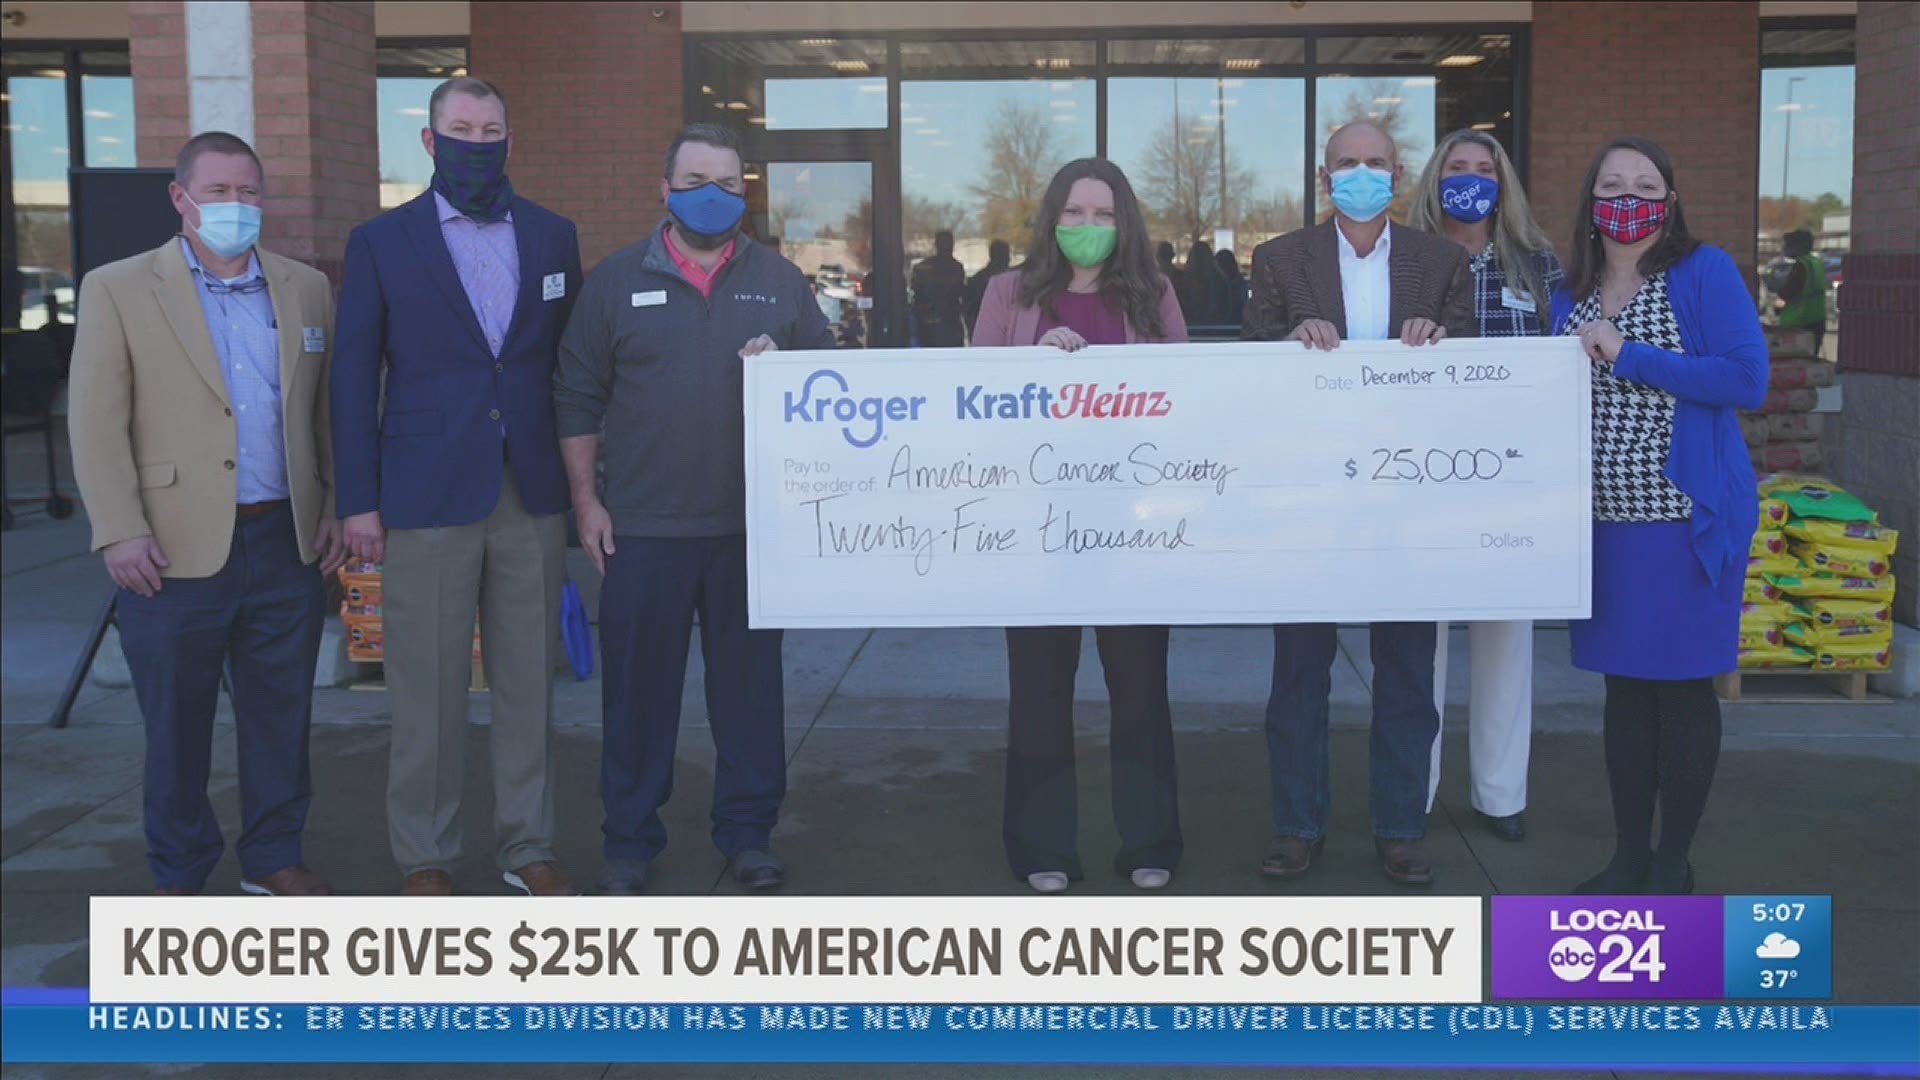 The company’s Delta division and KraftHeinz presented a $25,000 check to the American Cancer Society during a ribbon-cutting ceremony in Southaven.